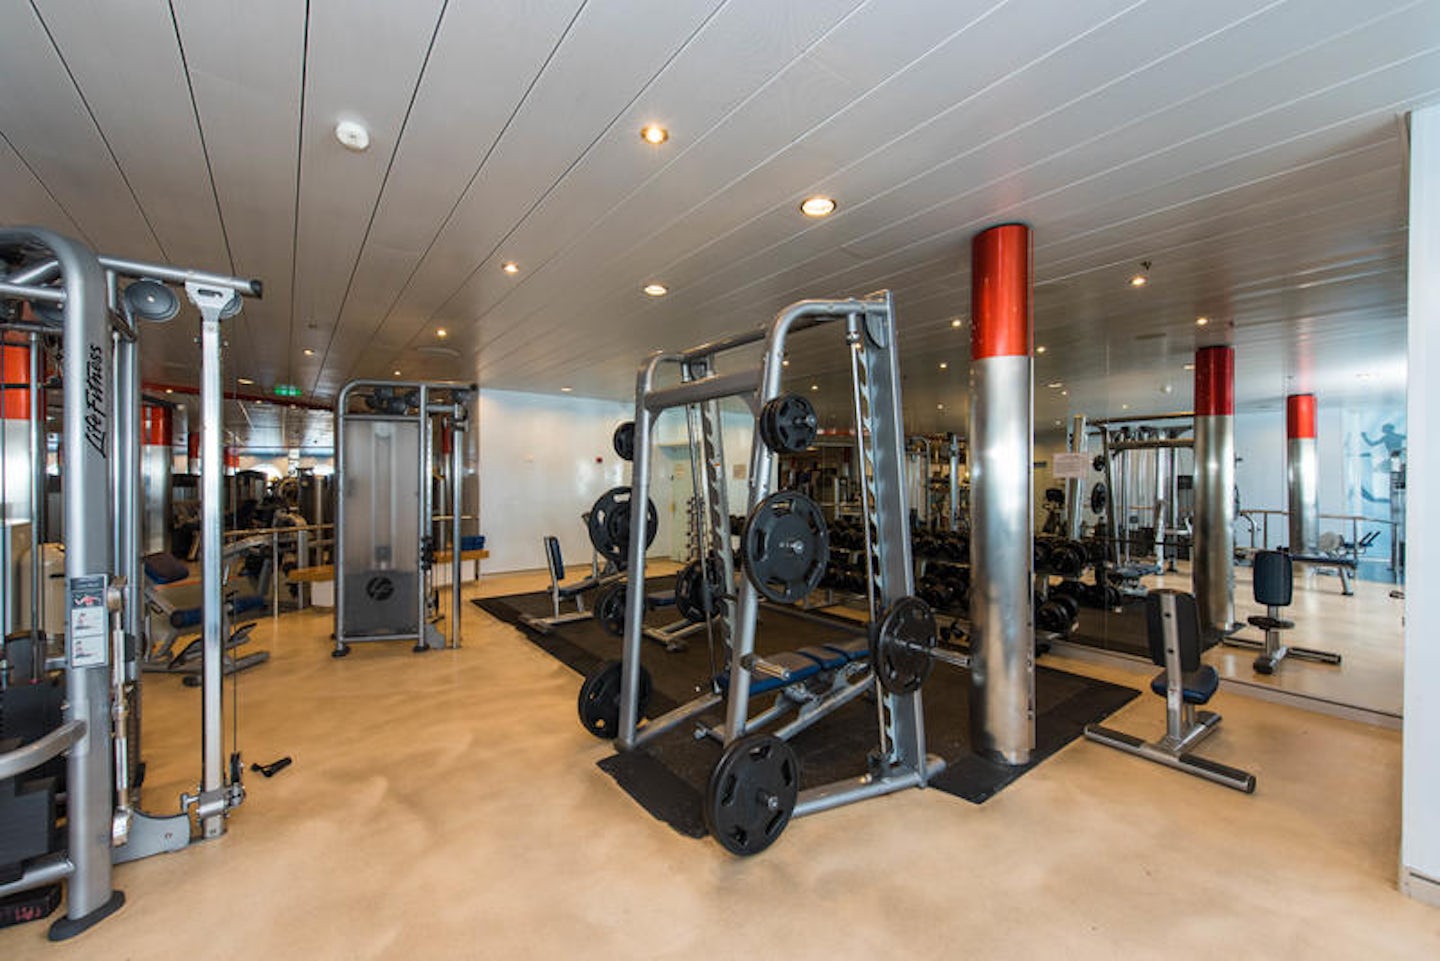 Fitness Center on Oasis of the Seas